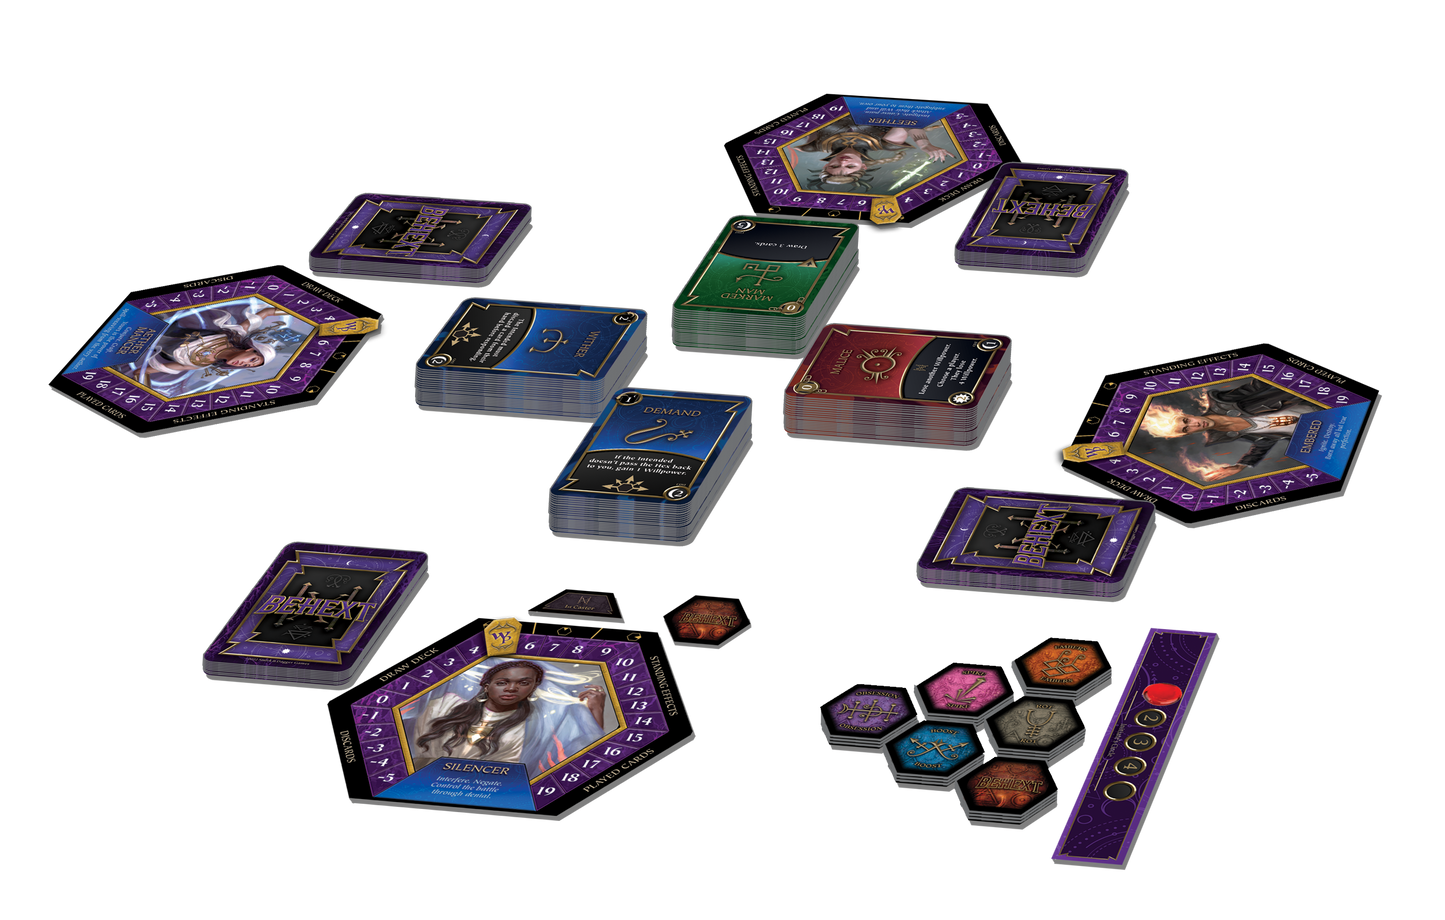 Game - BEHEXT: Unique Deck Building Game with Hexes and Curses